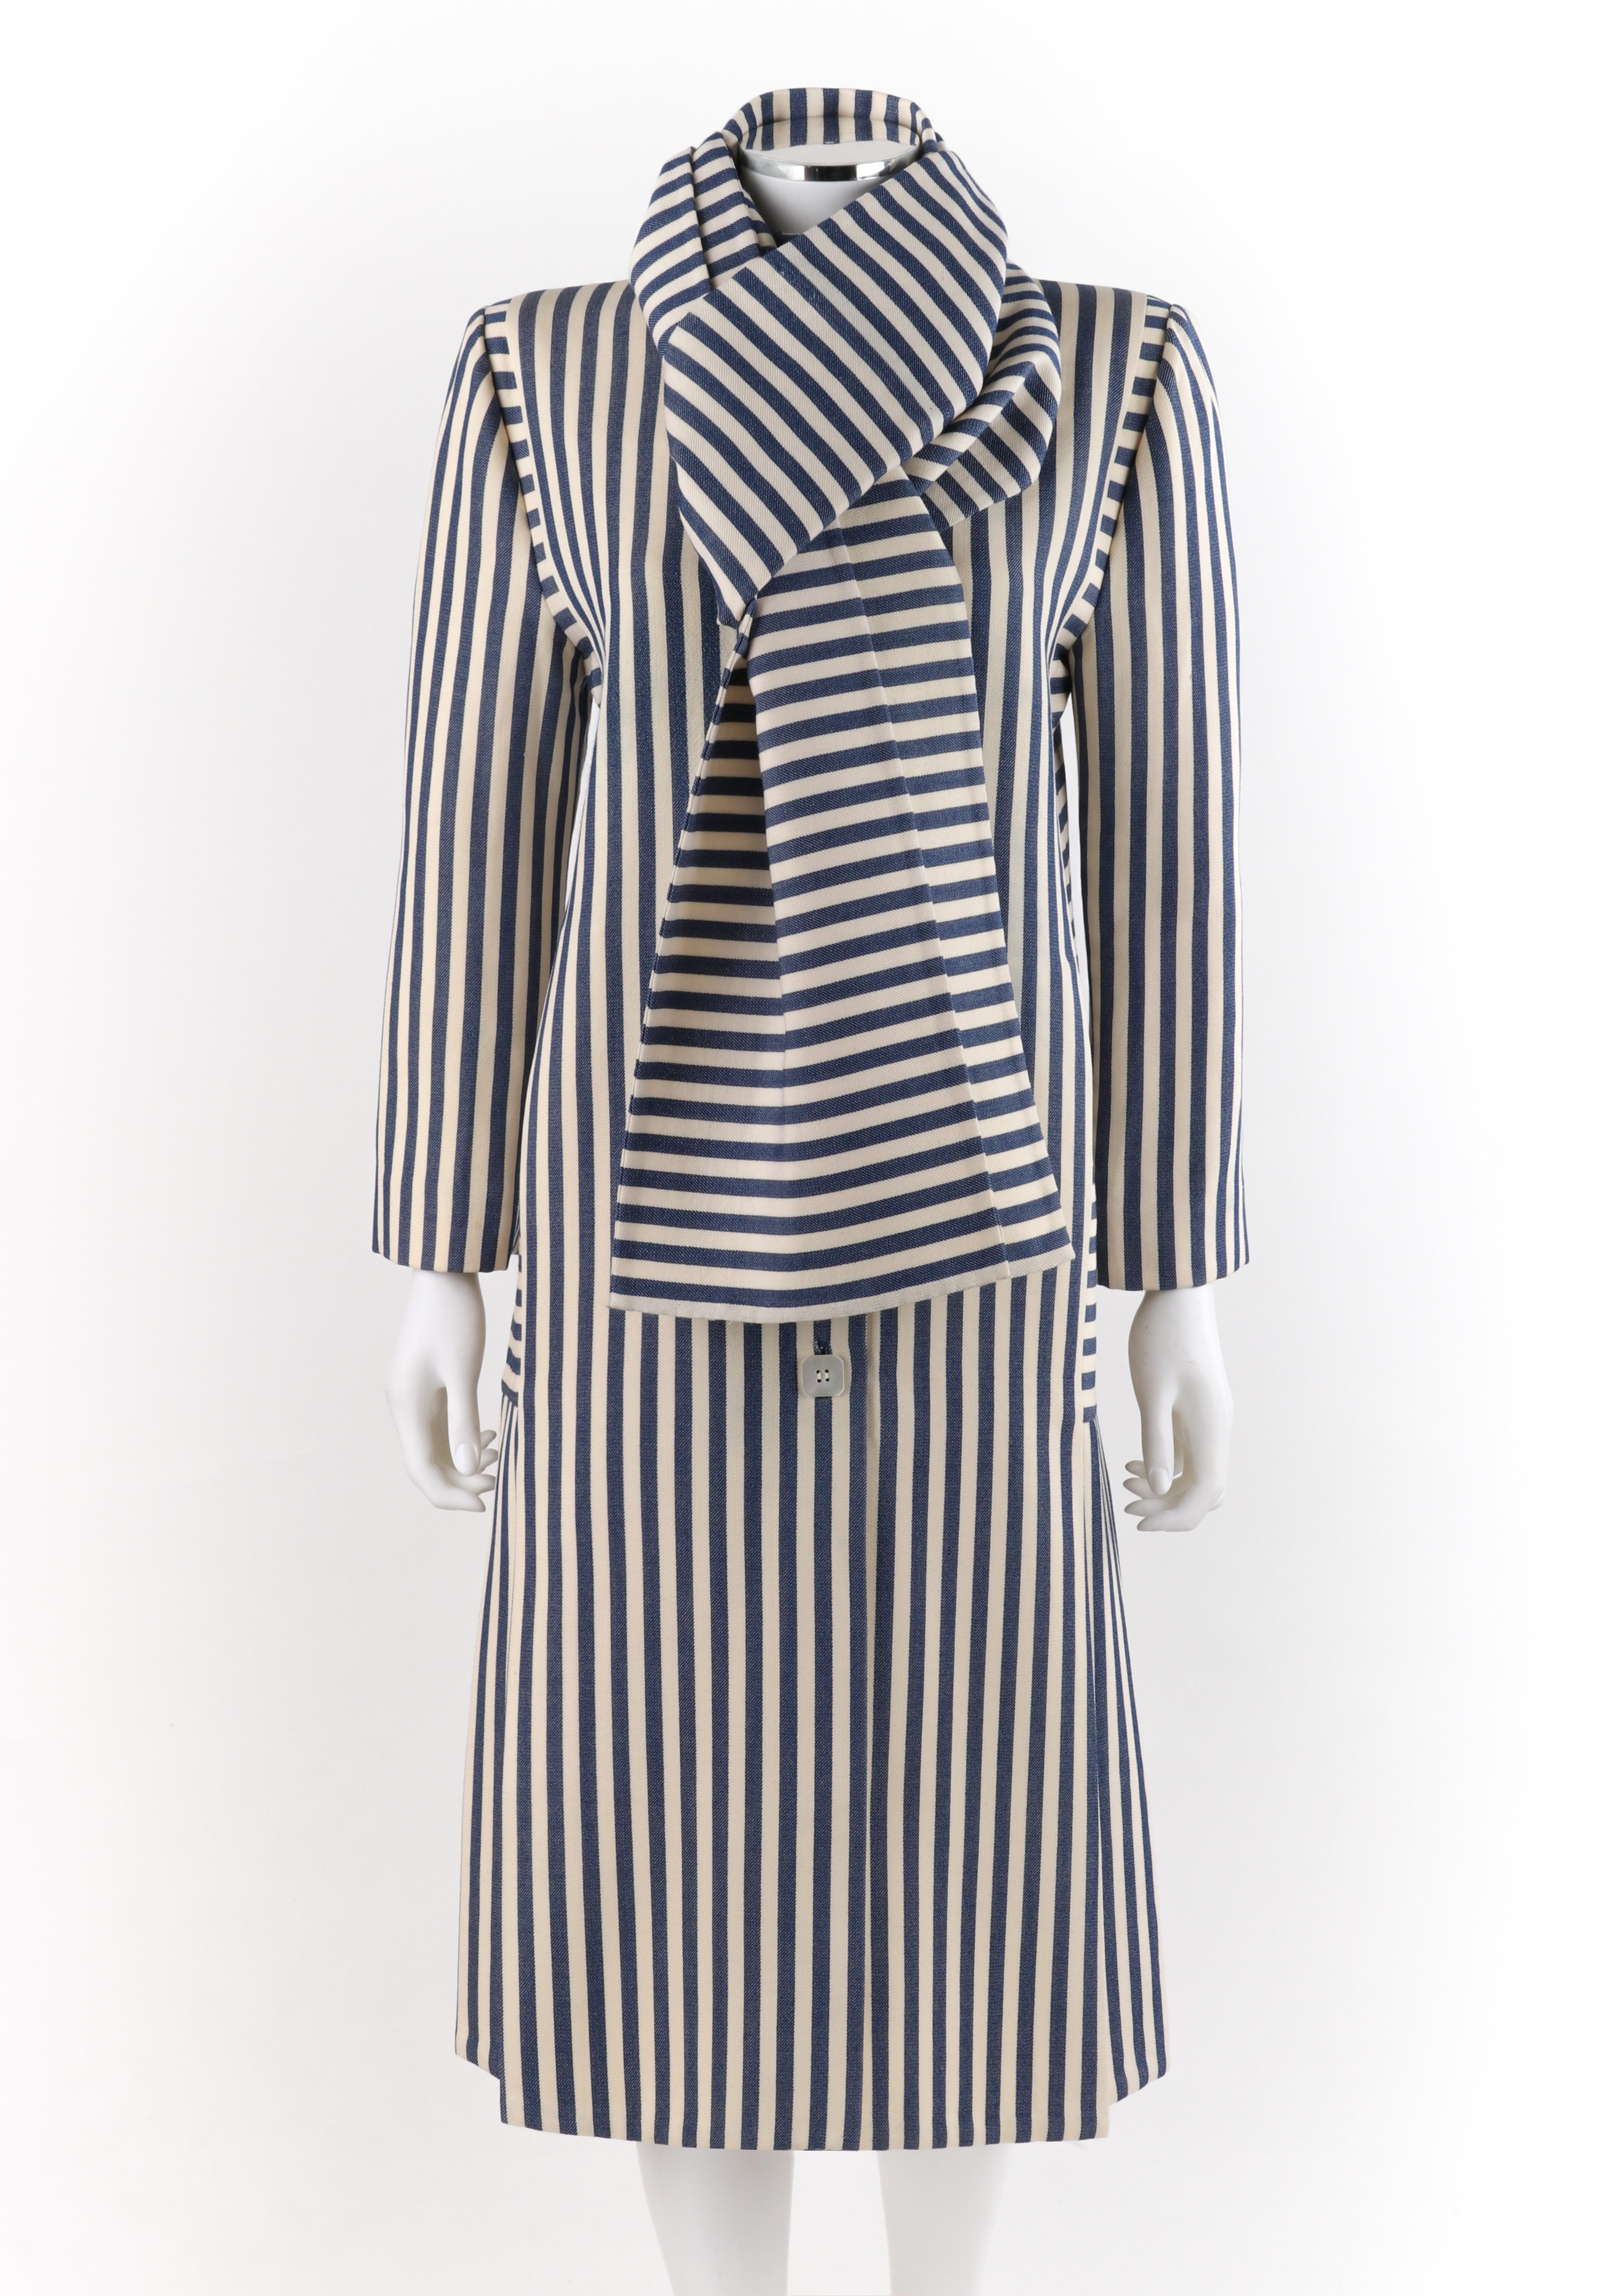 PAULINE TRIGERE c.1980’s Blue Ivory Striped Pleated Coat Jacket Sash Scarf Set

Circa: 1980’s 
Label(s): Pauline Trigere
Designer: Pauline Trigere
Style: Full-length overcoat
Color(s): Blue and ivory
Lined: Yes- partial
Unmarked Fabric Content (feel